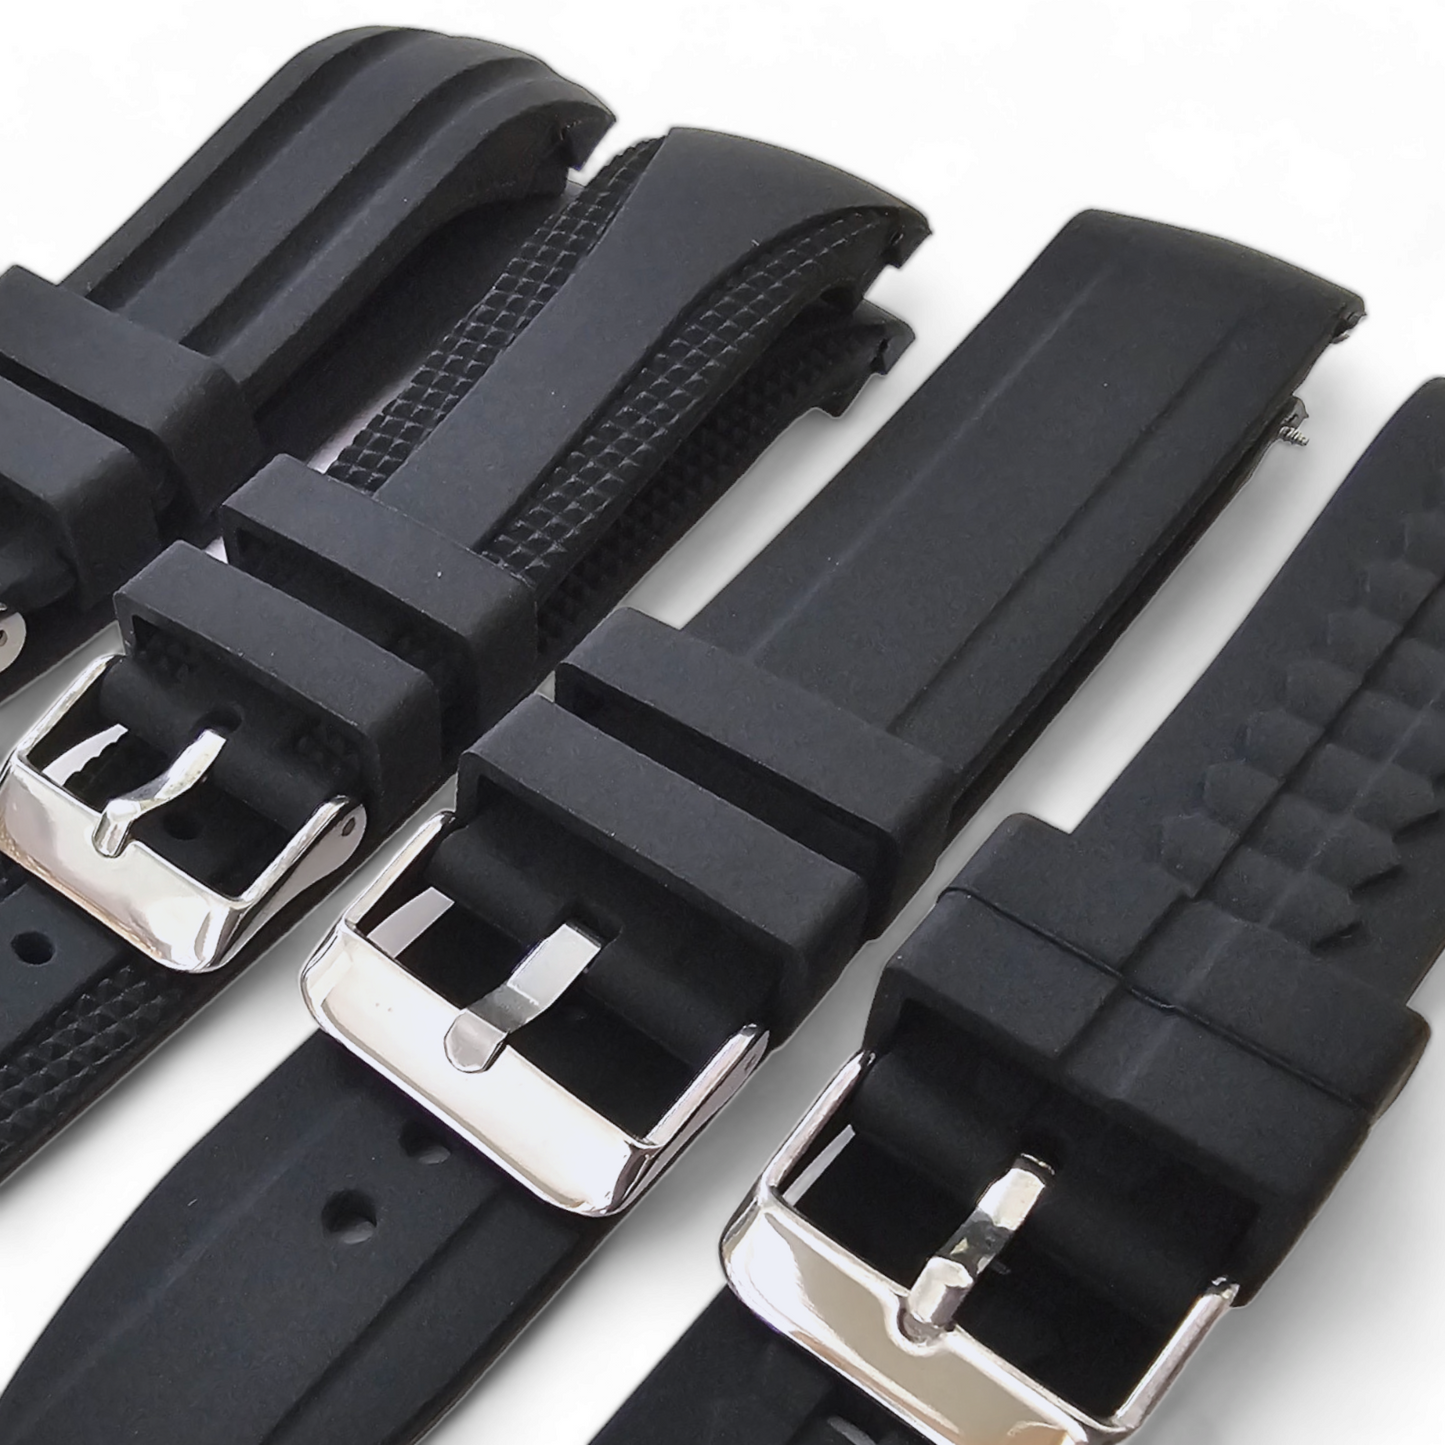 Curved End Silicone Rubber Watch Strap 18mm 20mm 22mm 24mm Black